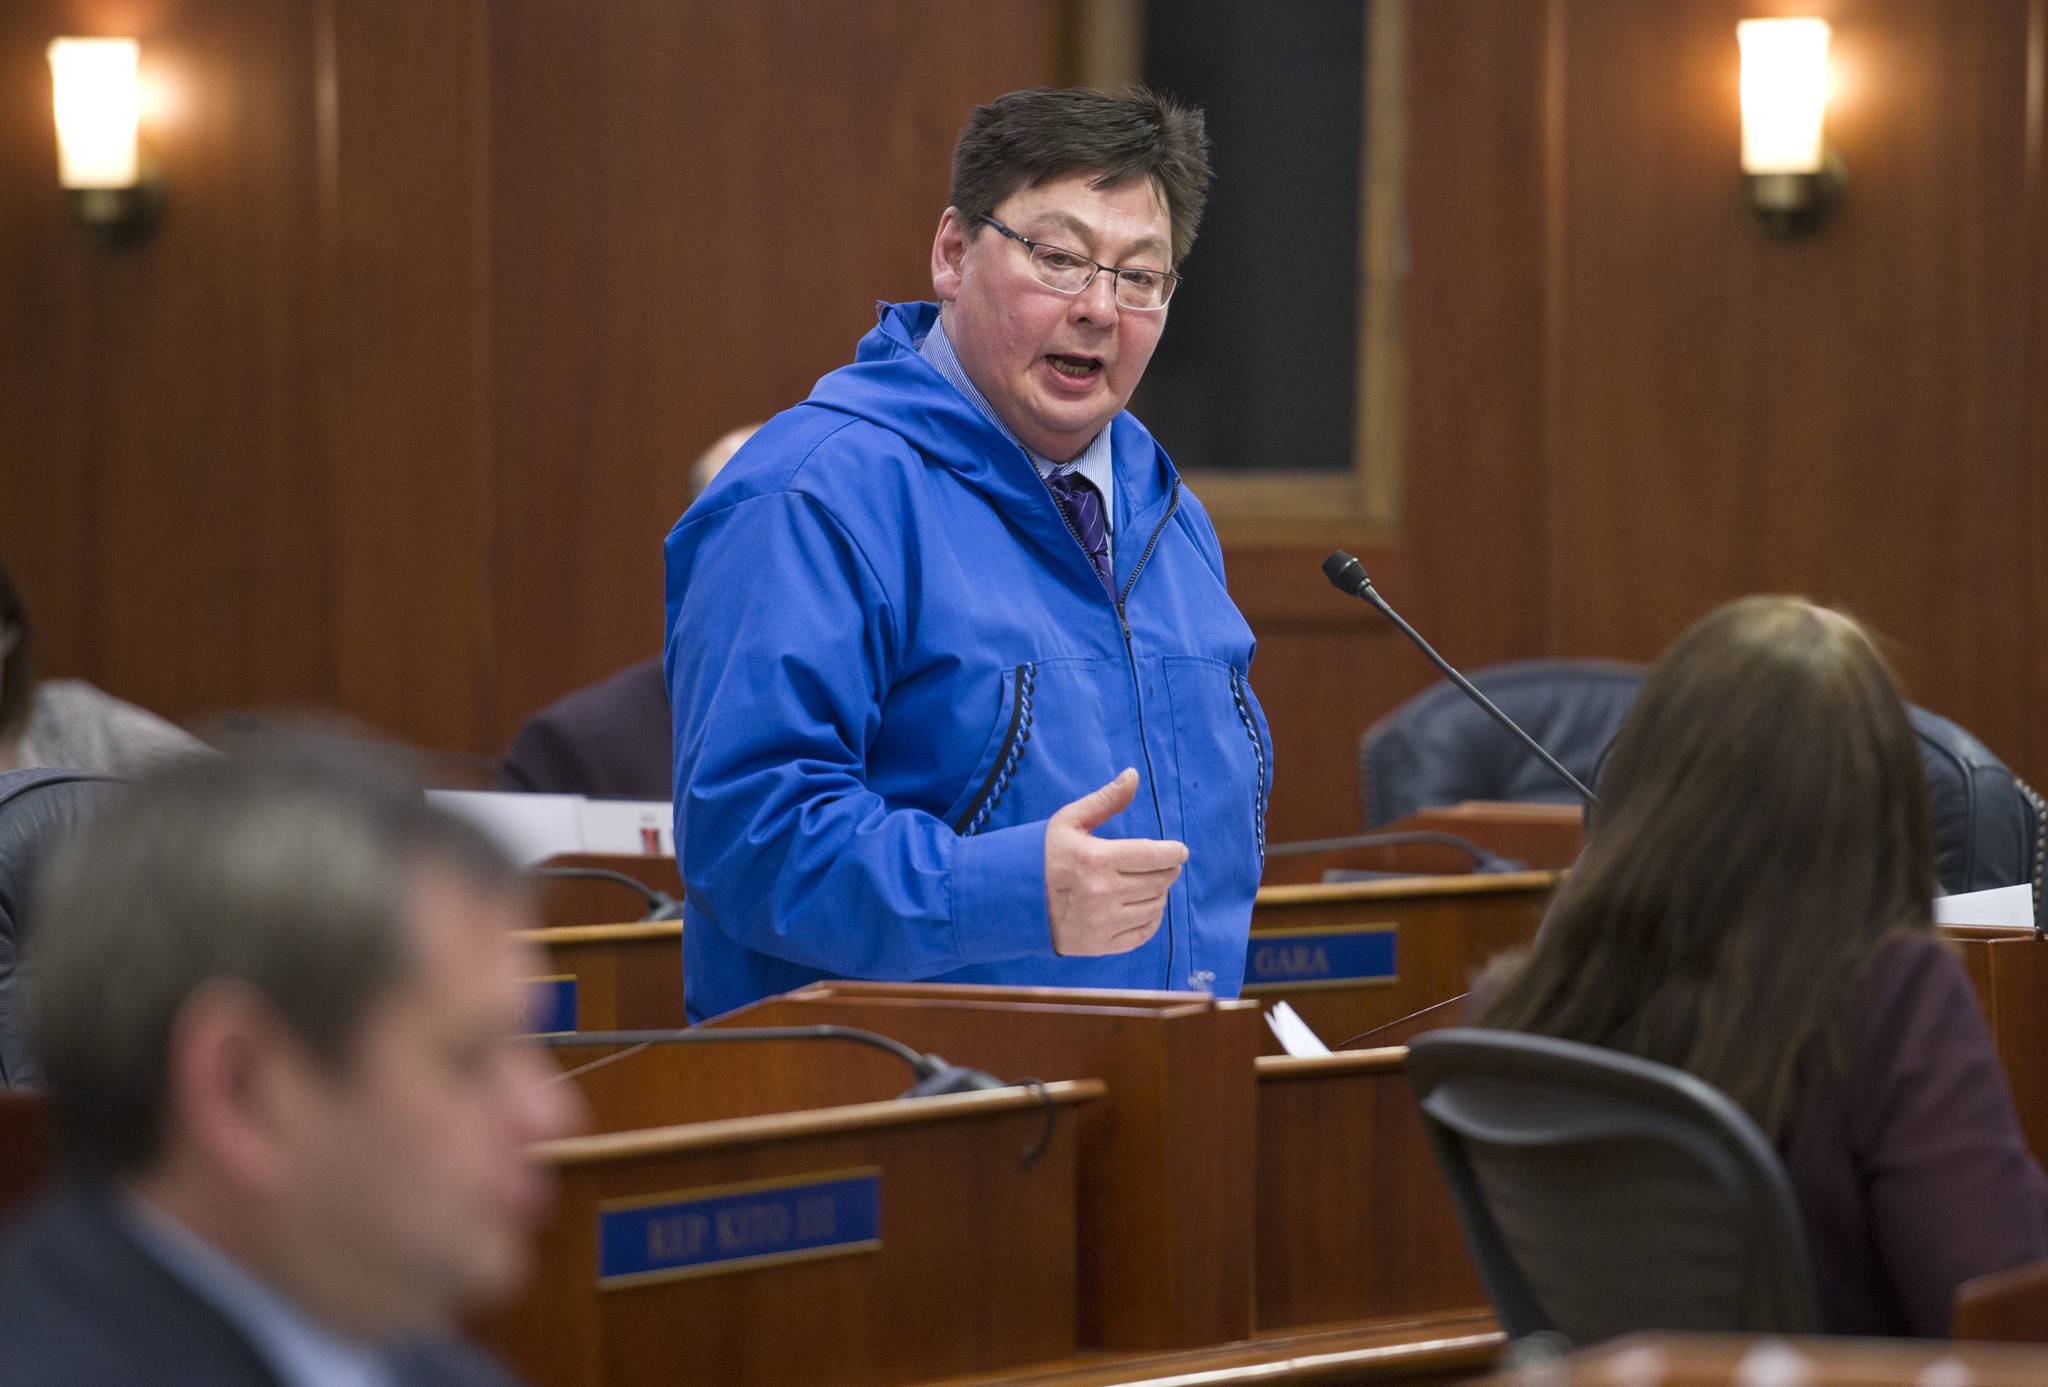 In this Feb. 15, 2017 photo, Rep. Dean Westlake, D-Kotzebue, speaks in support of his resolution to allow oil drilling in the Arctic National Wildlife Refuge during a House floor sesison. (Michael Penn | Juneau Empire File)